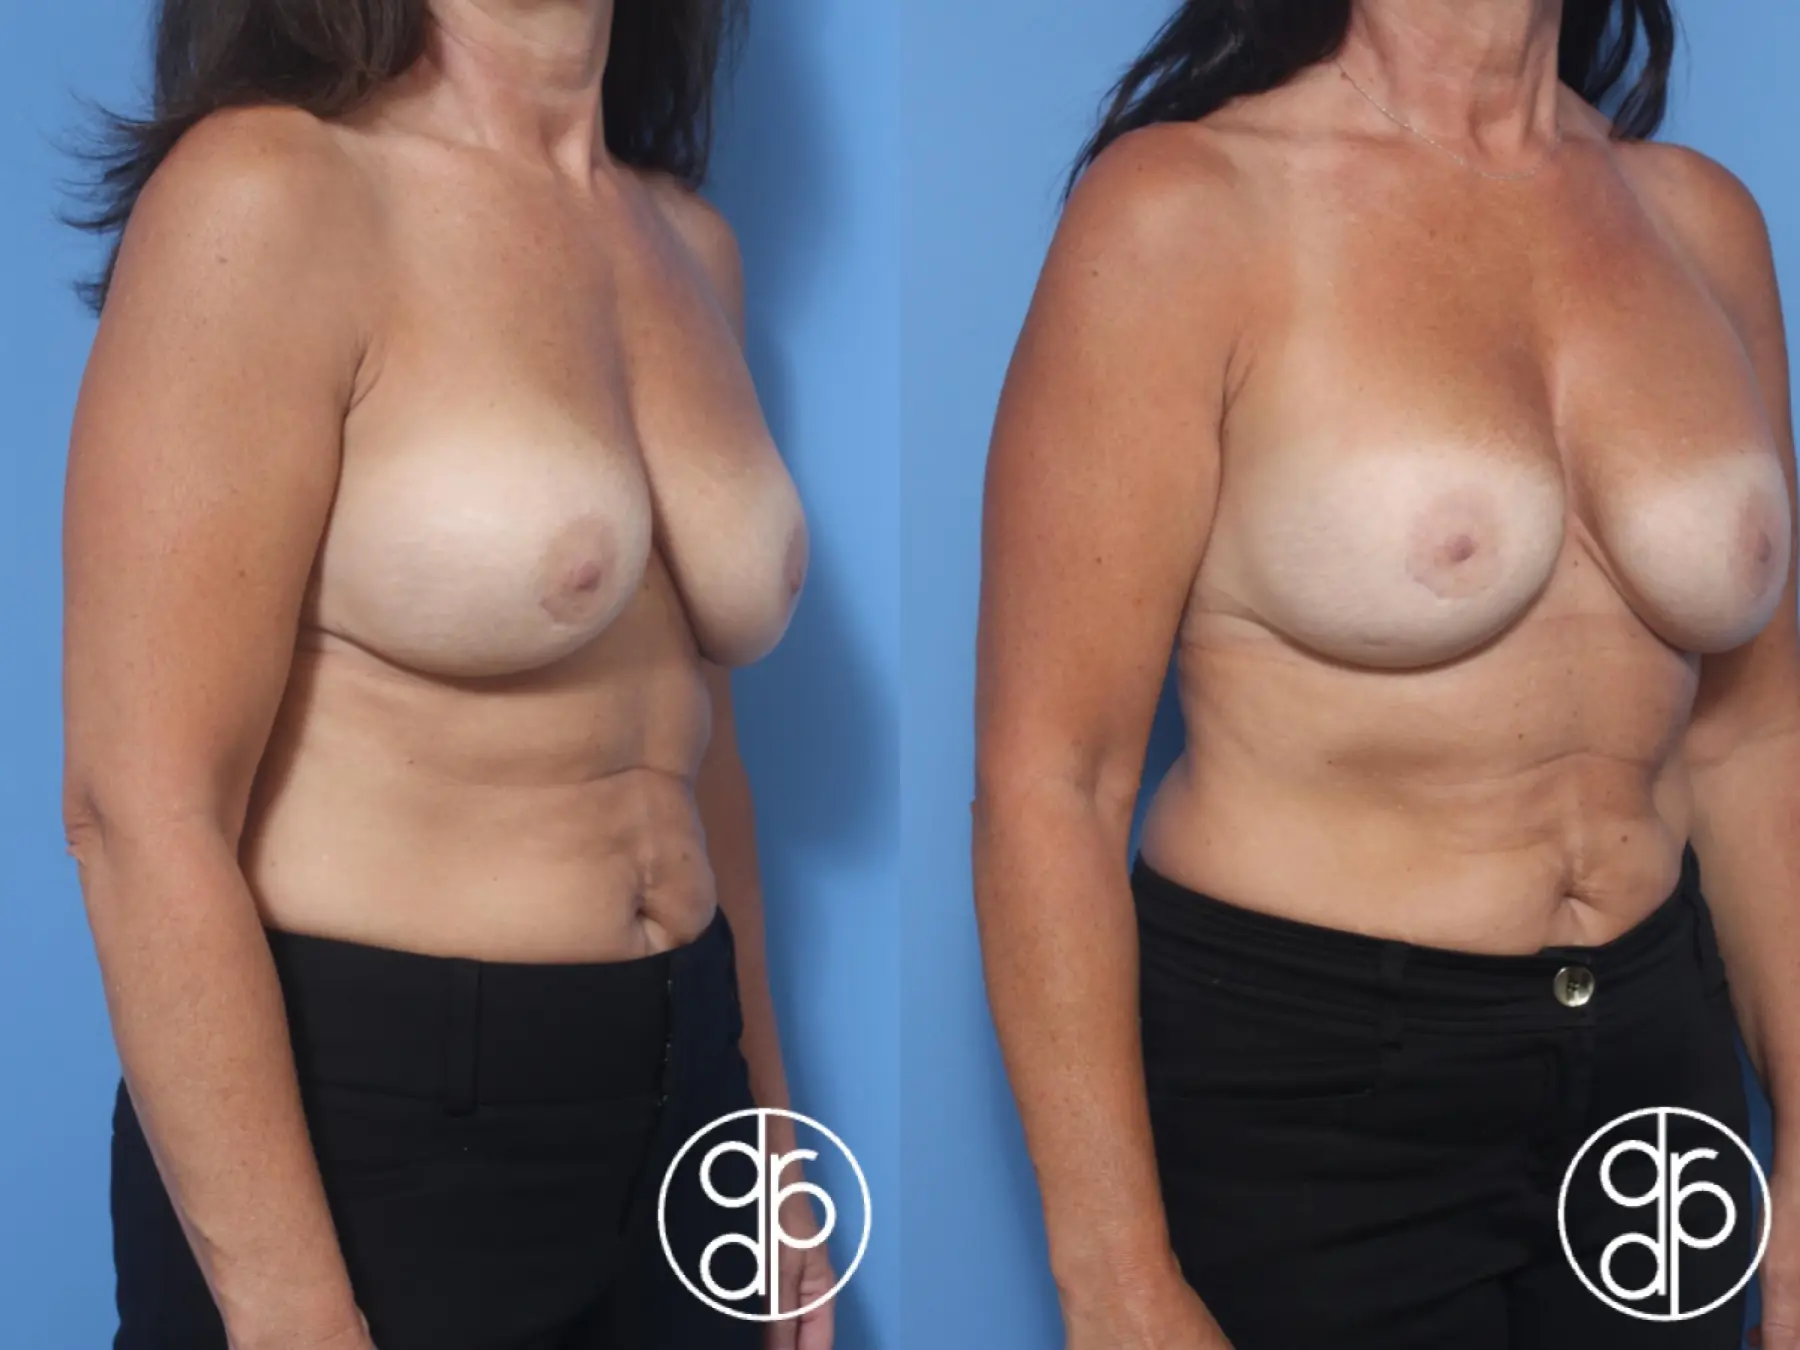 patient 11904 remove and replace breast implants before and after result - Before and After 2